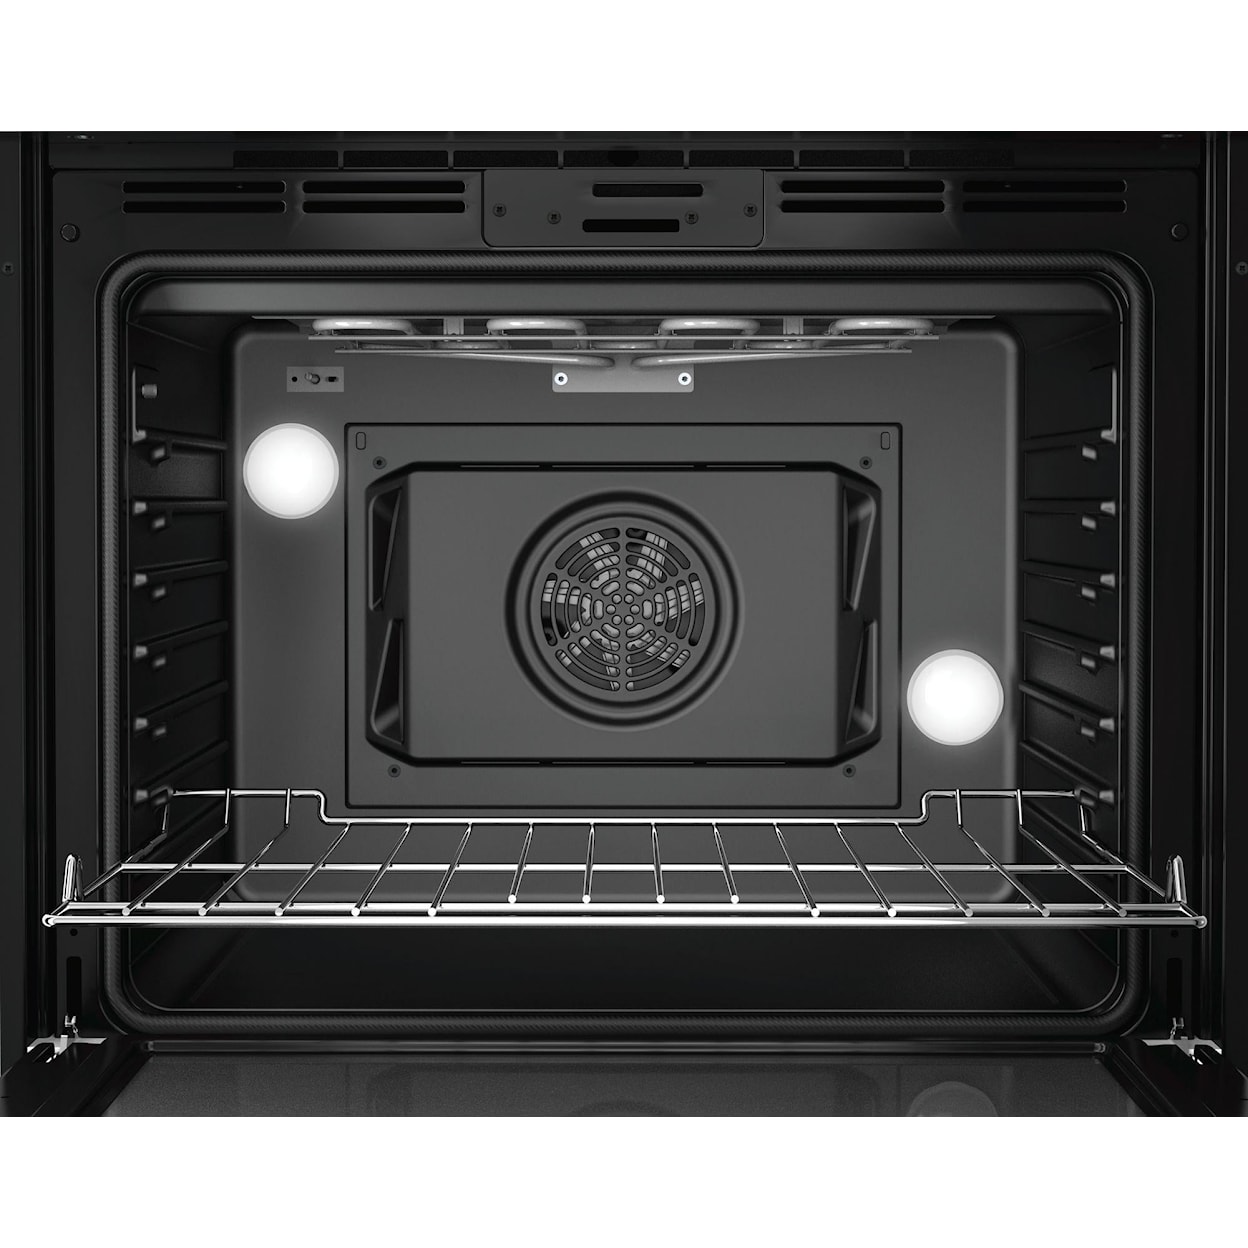 Bosch Electric Ranges Wall Oven